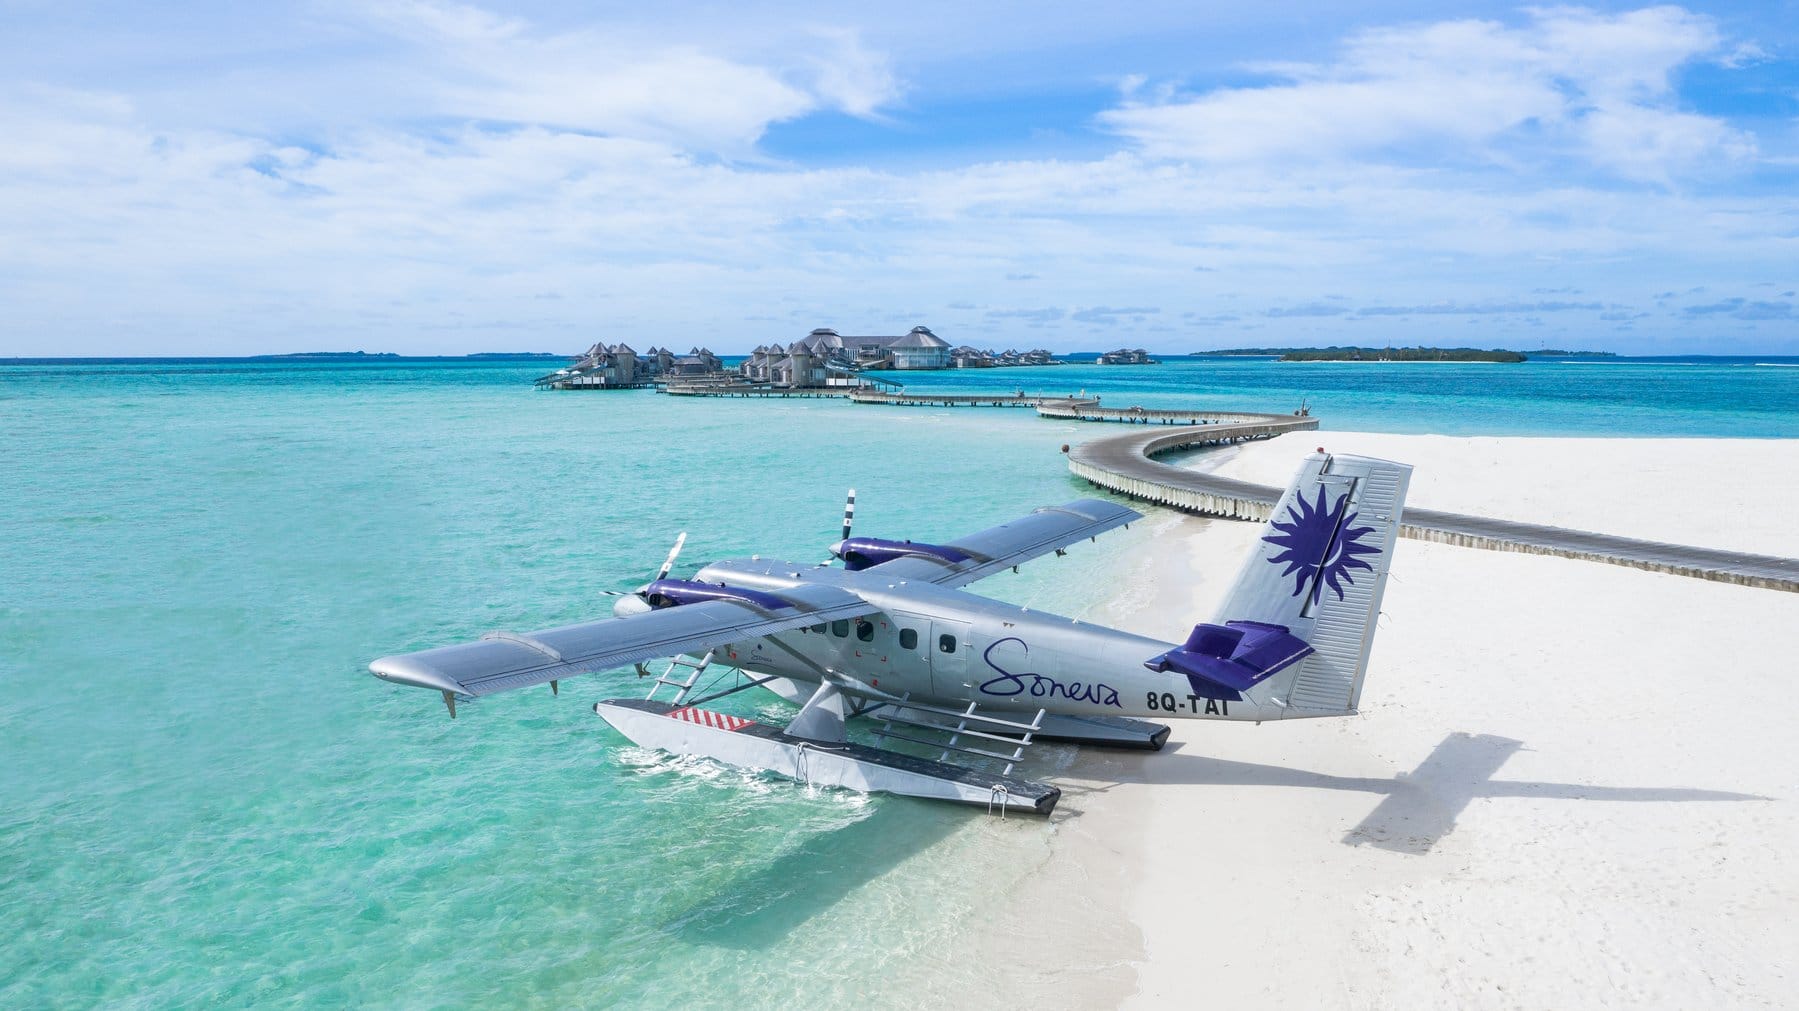 MONTE Completes Financing of One DHC-6-200 HG Aircraft with Soneva Holdings